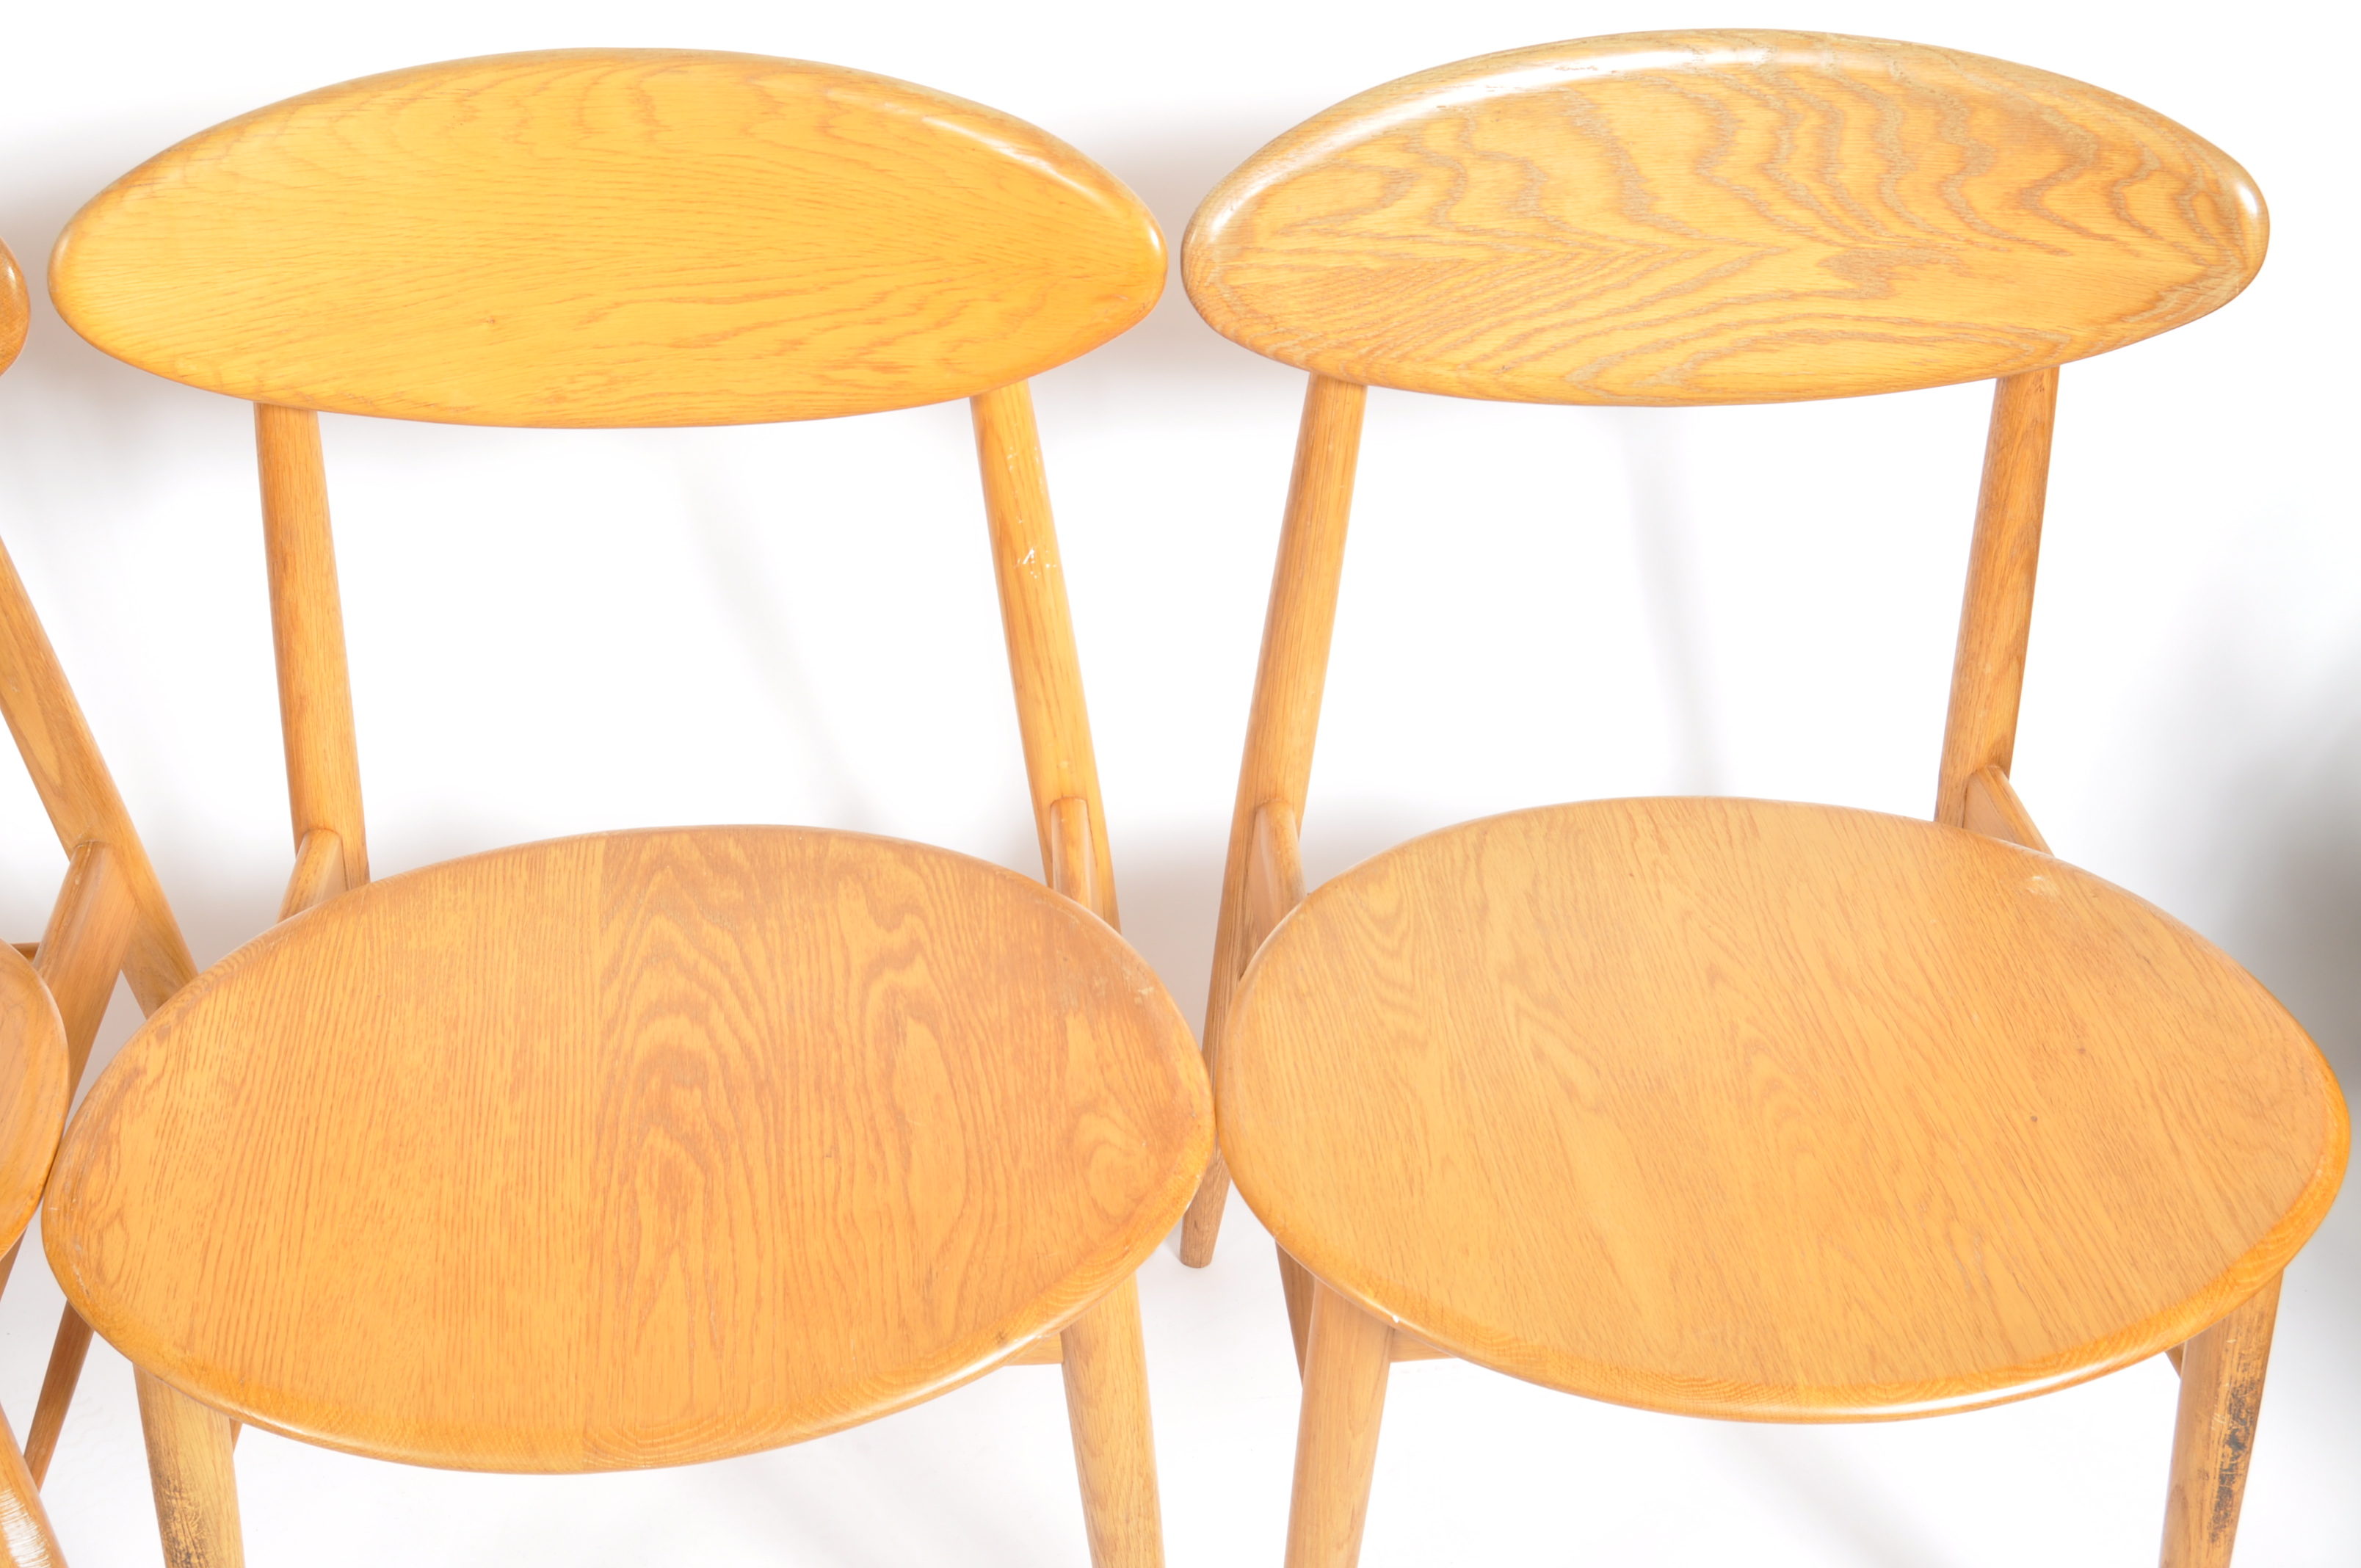 SET OF FOUR RETRO ELM DINING CHAIRS / SIDE CHAIRS - Image 4 of 8